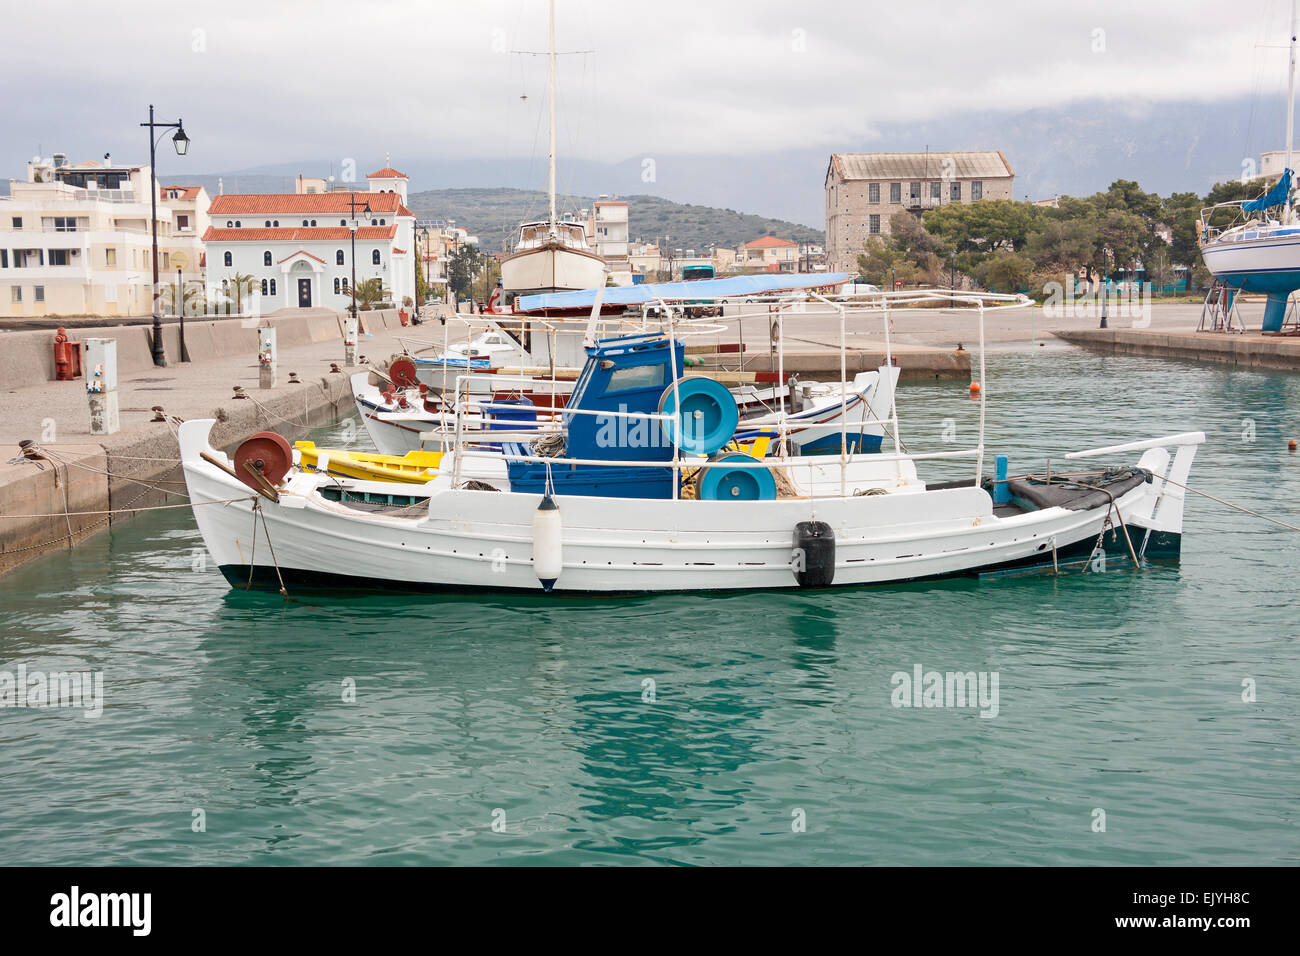 Part of the waterfront of the town of Itea, central Greece Stock Photo